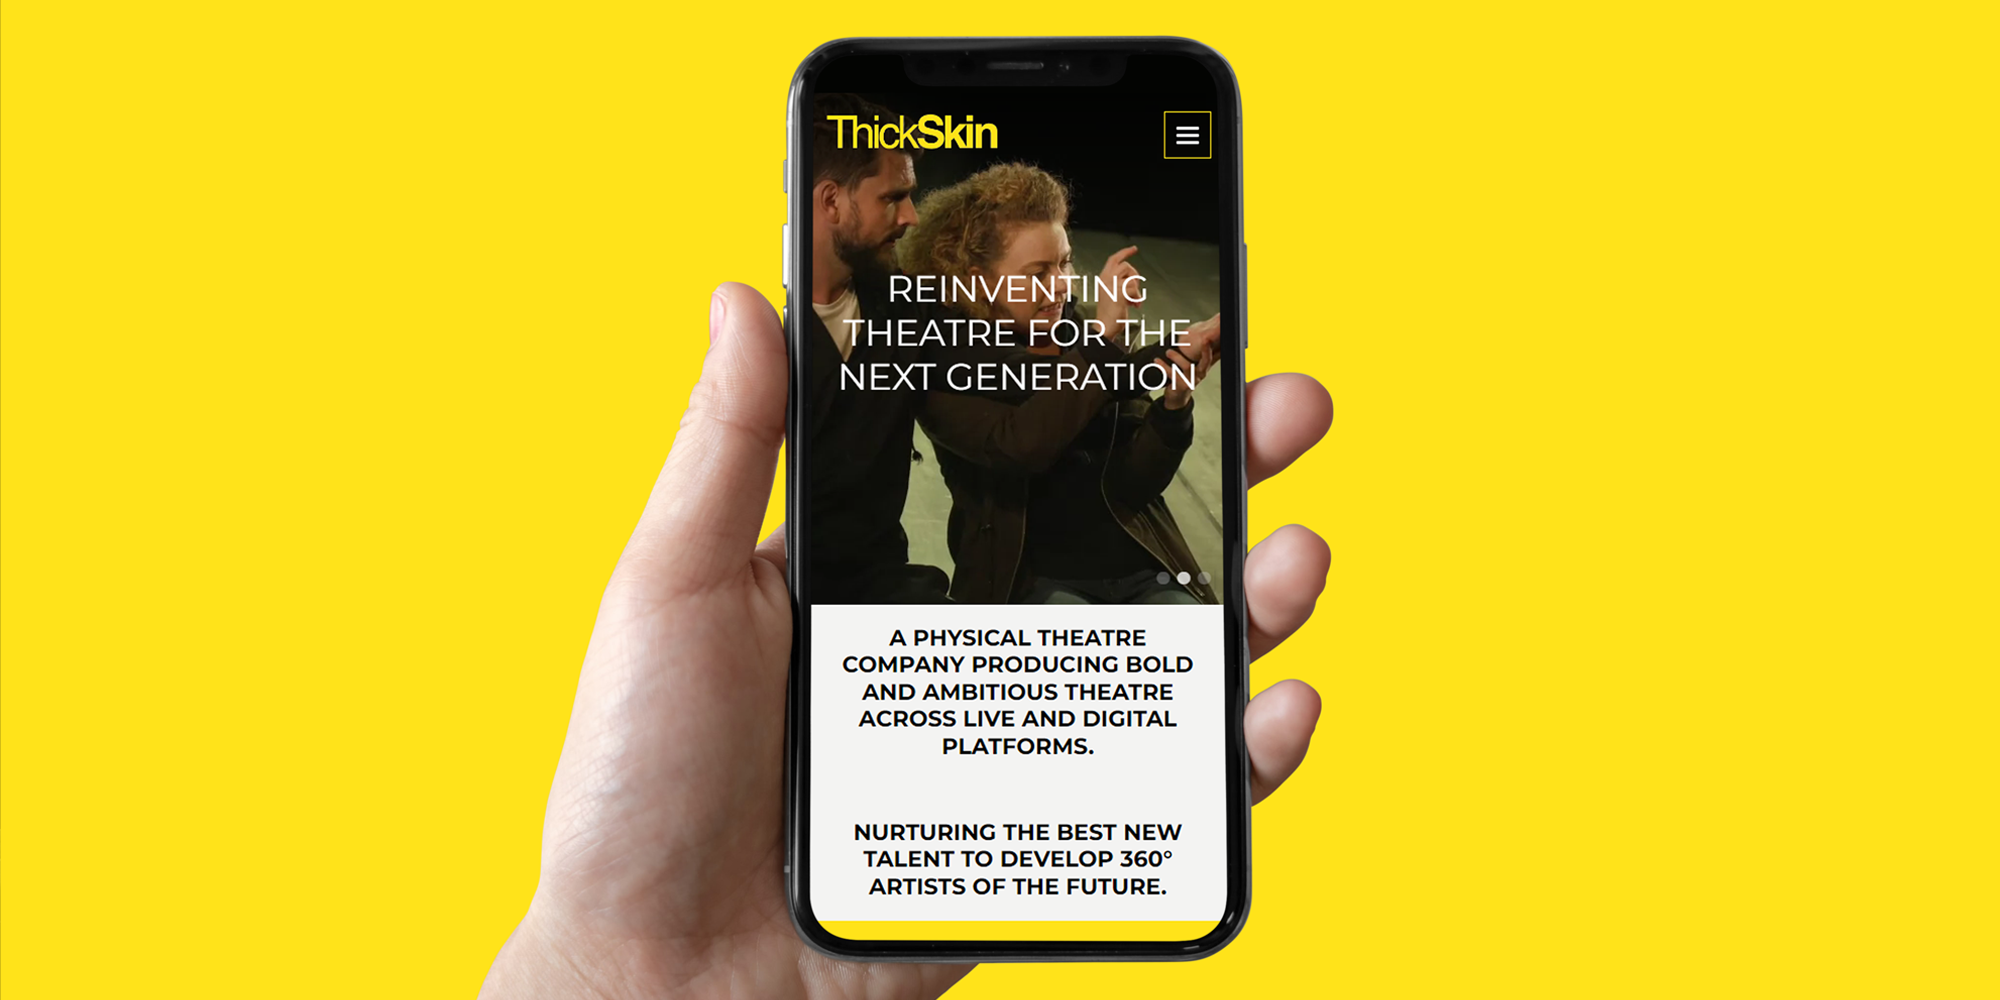 ThickSkin theatre school page shown on a phone screen